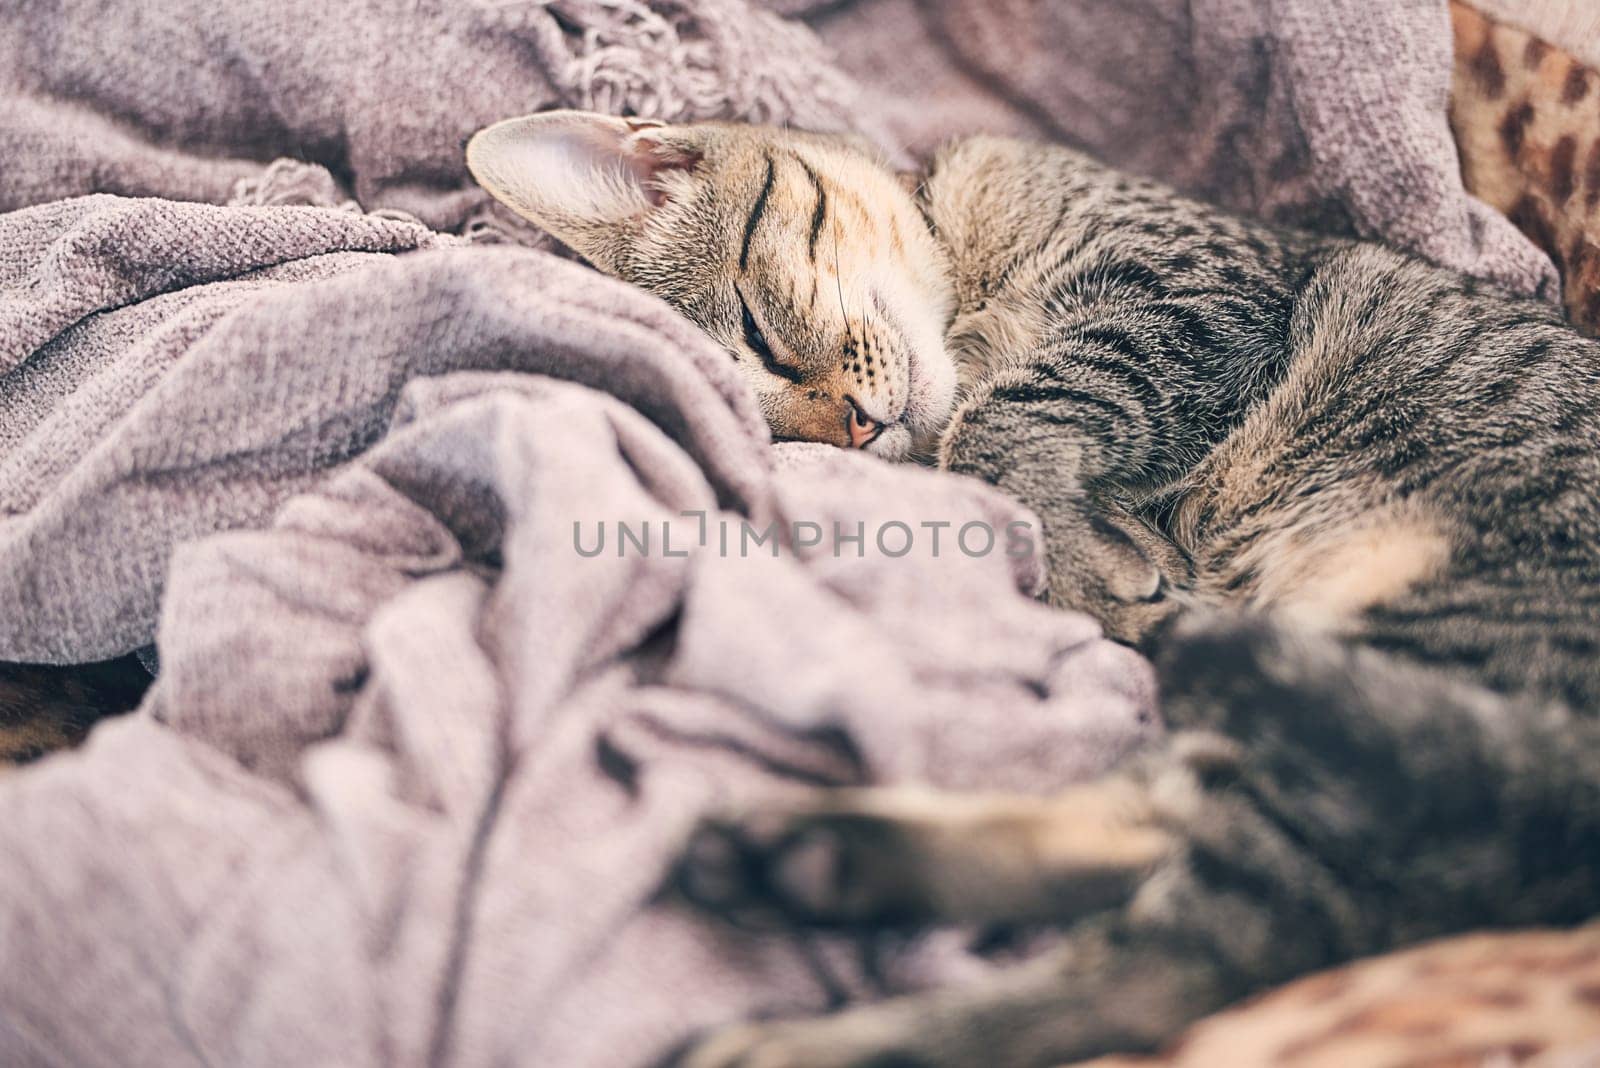 Blanket, sleeping and kitten in home for relax, resting and calm for cute, adorable and innocent pet. Animal care, bed and closeup of young cat on duvet for nap, sleep and comfortable in house.